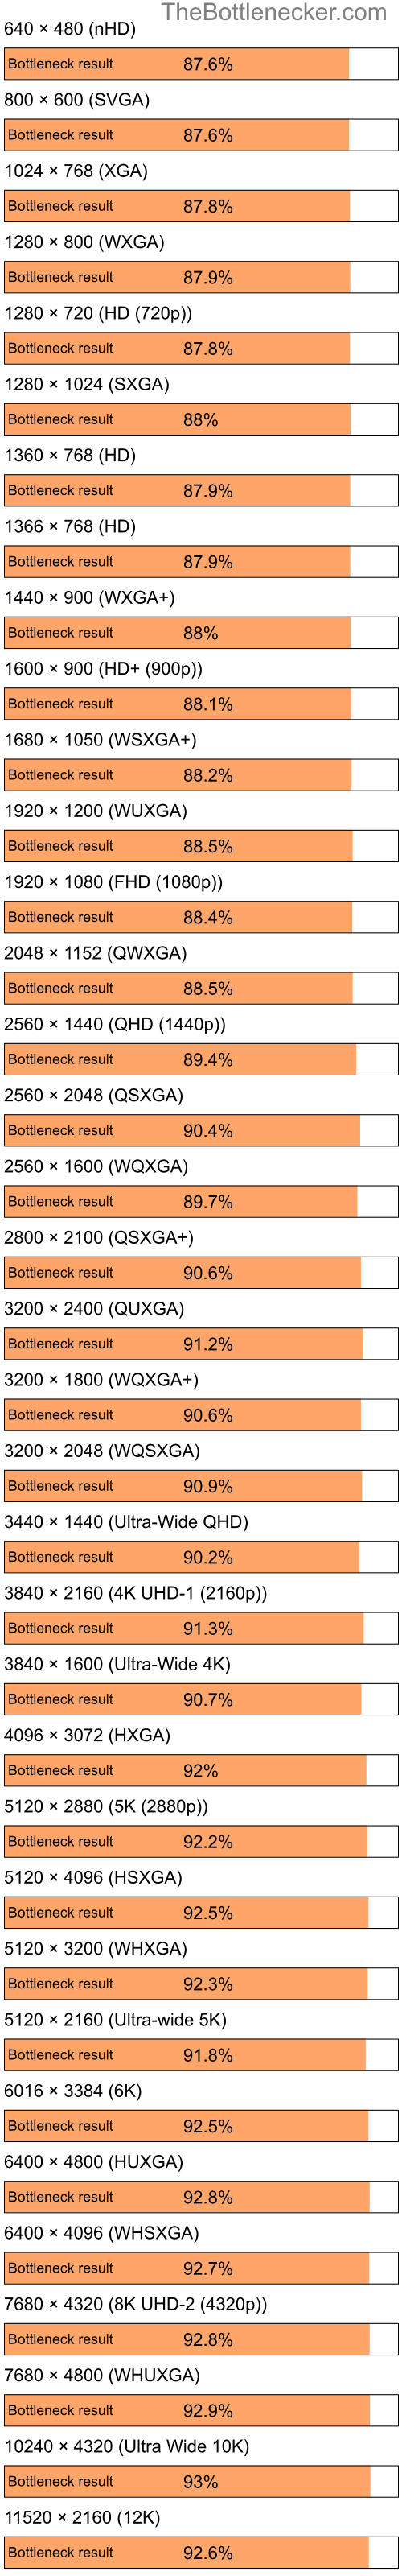 Bottleneck results by resolution for Intel Atom Z520 and AMD Mobility Radeon 9000 in Processor Intense Tasks